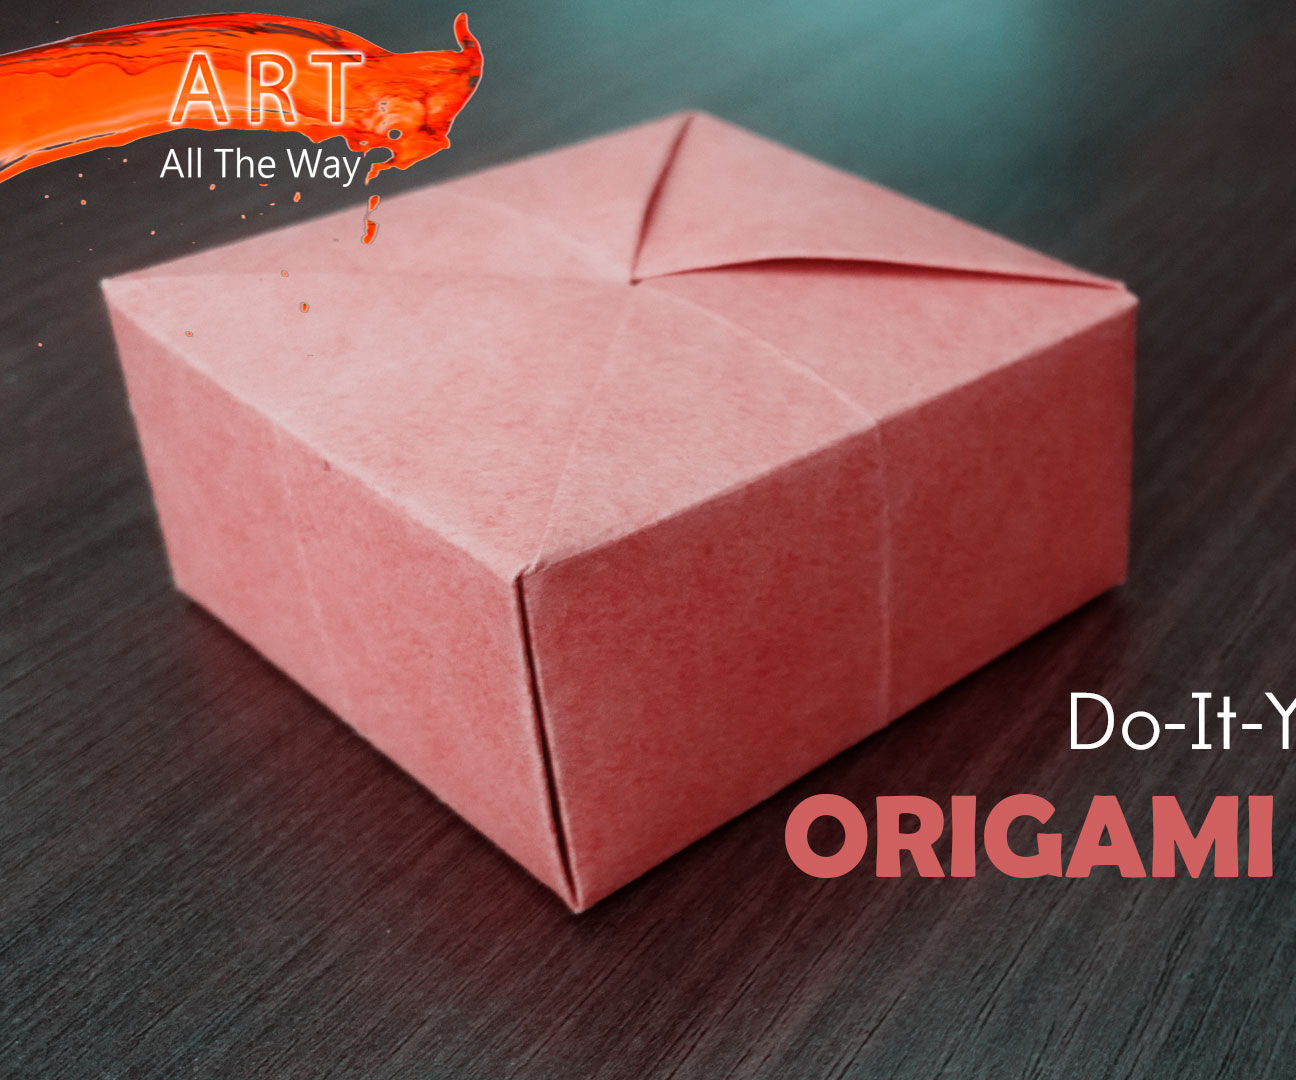 Origami One Sheet Origami Gift Box With One Sheet Of Paper